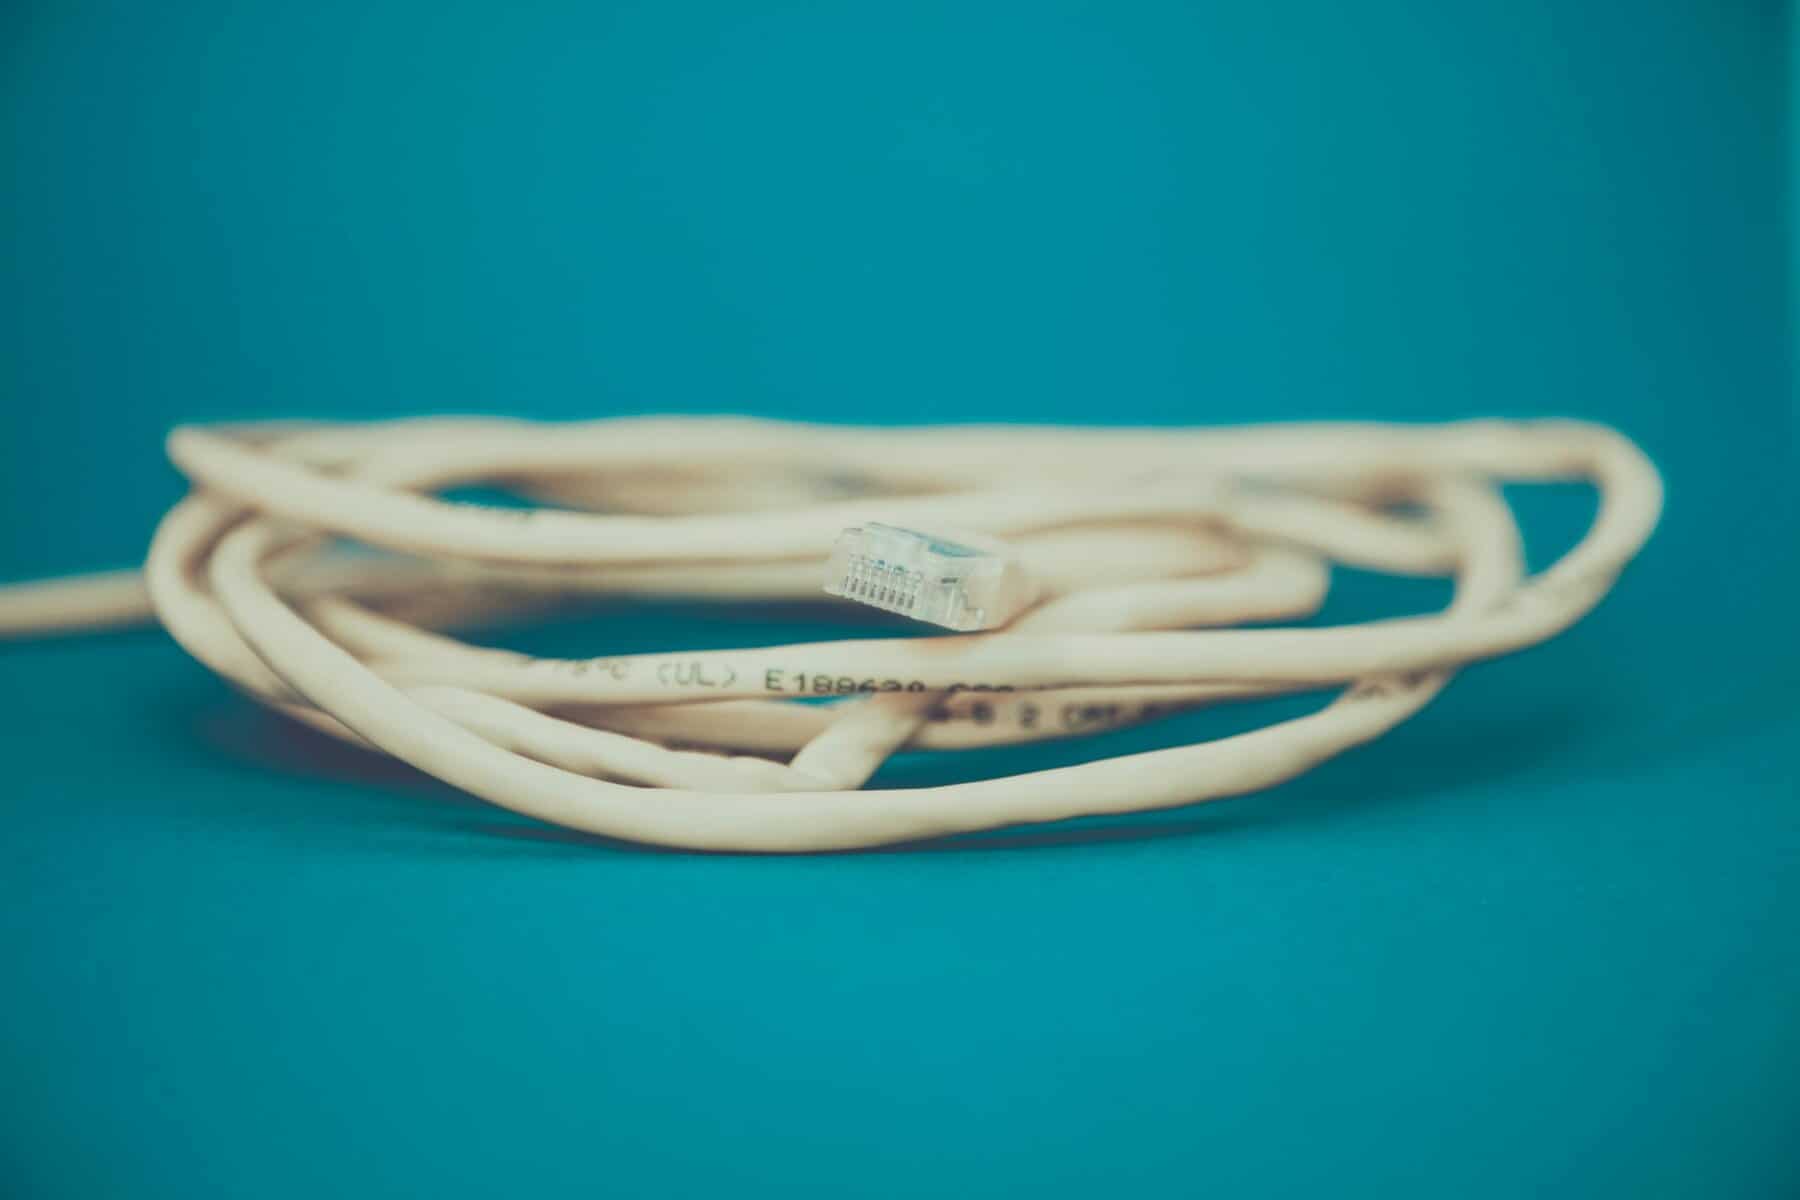 cat cable standards printed on an ethernet cable